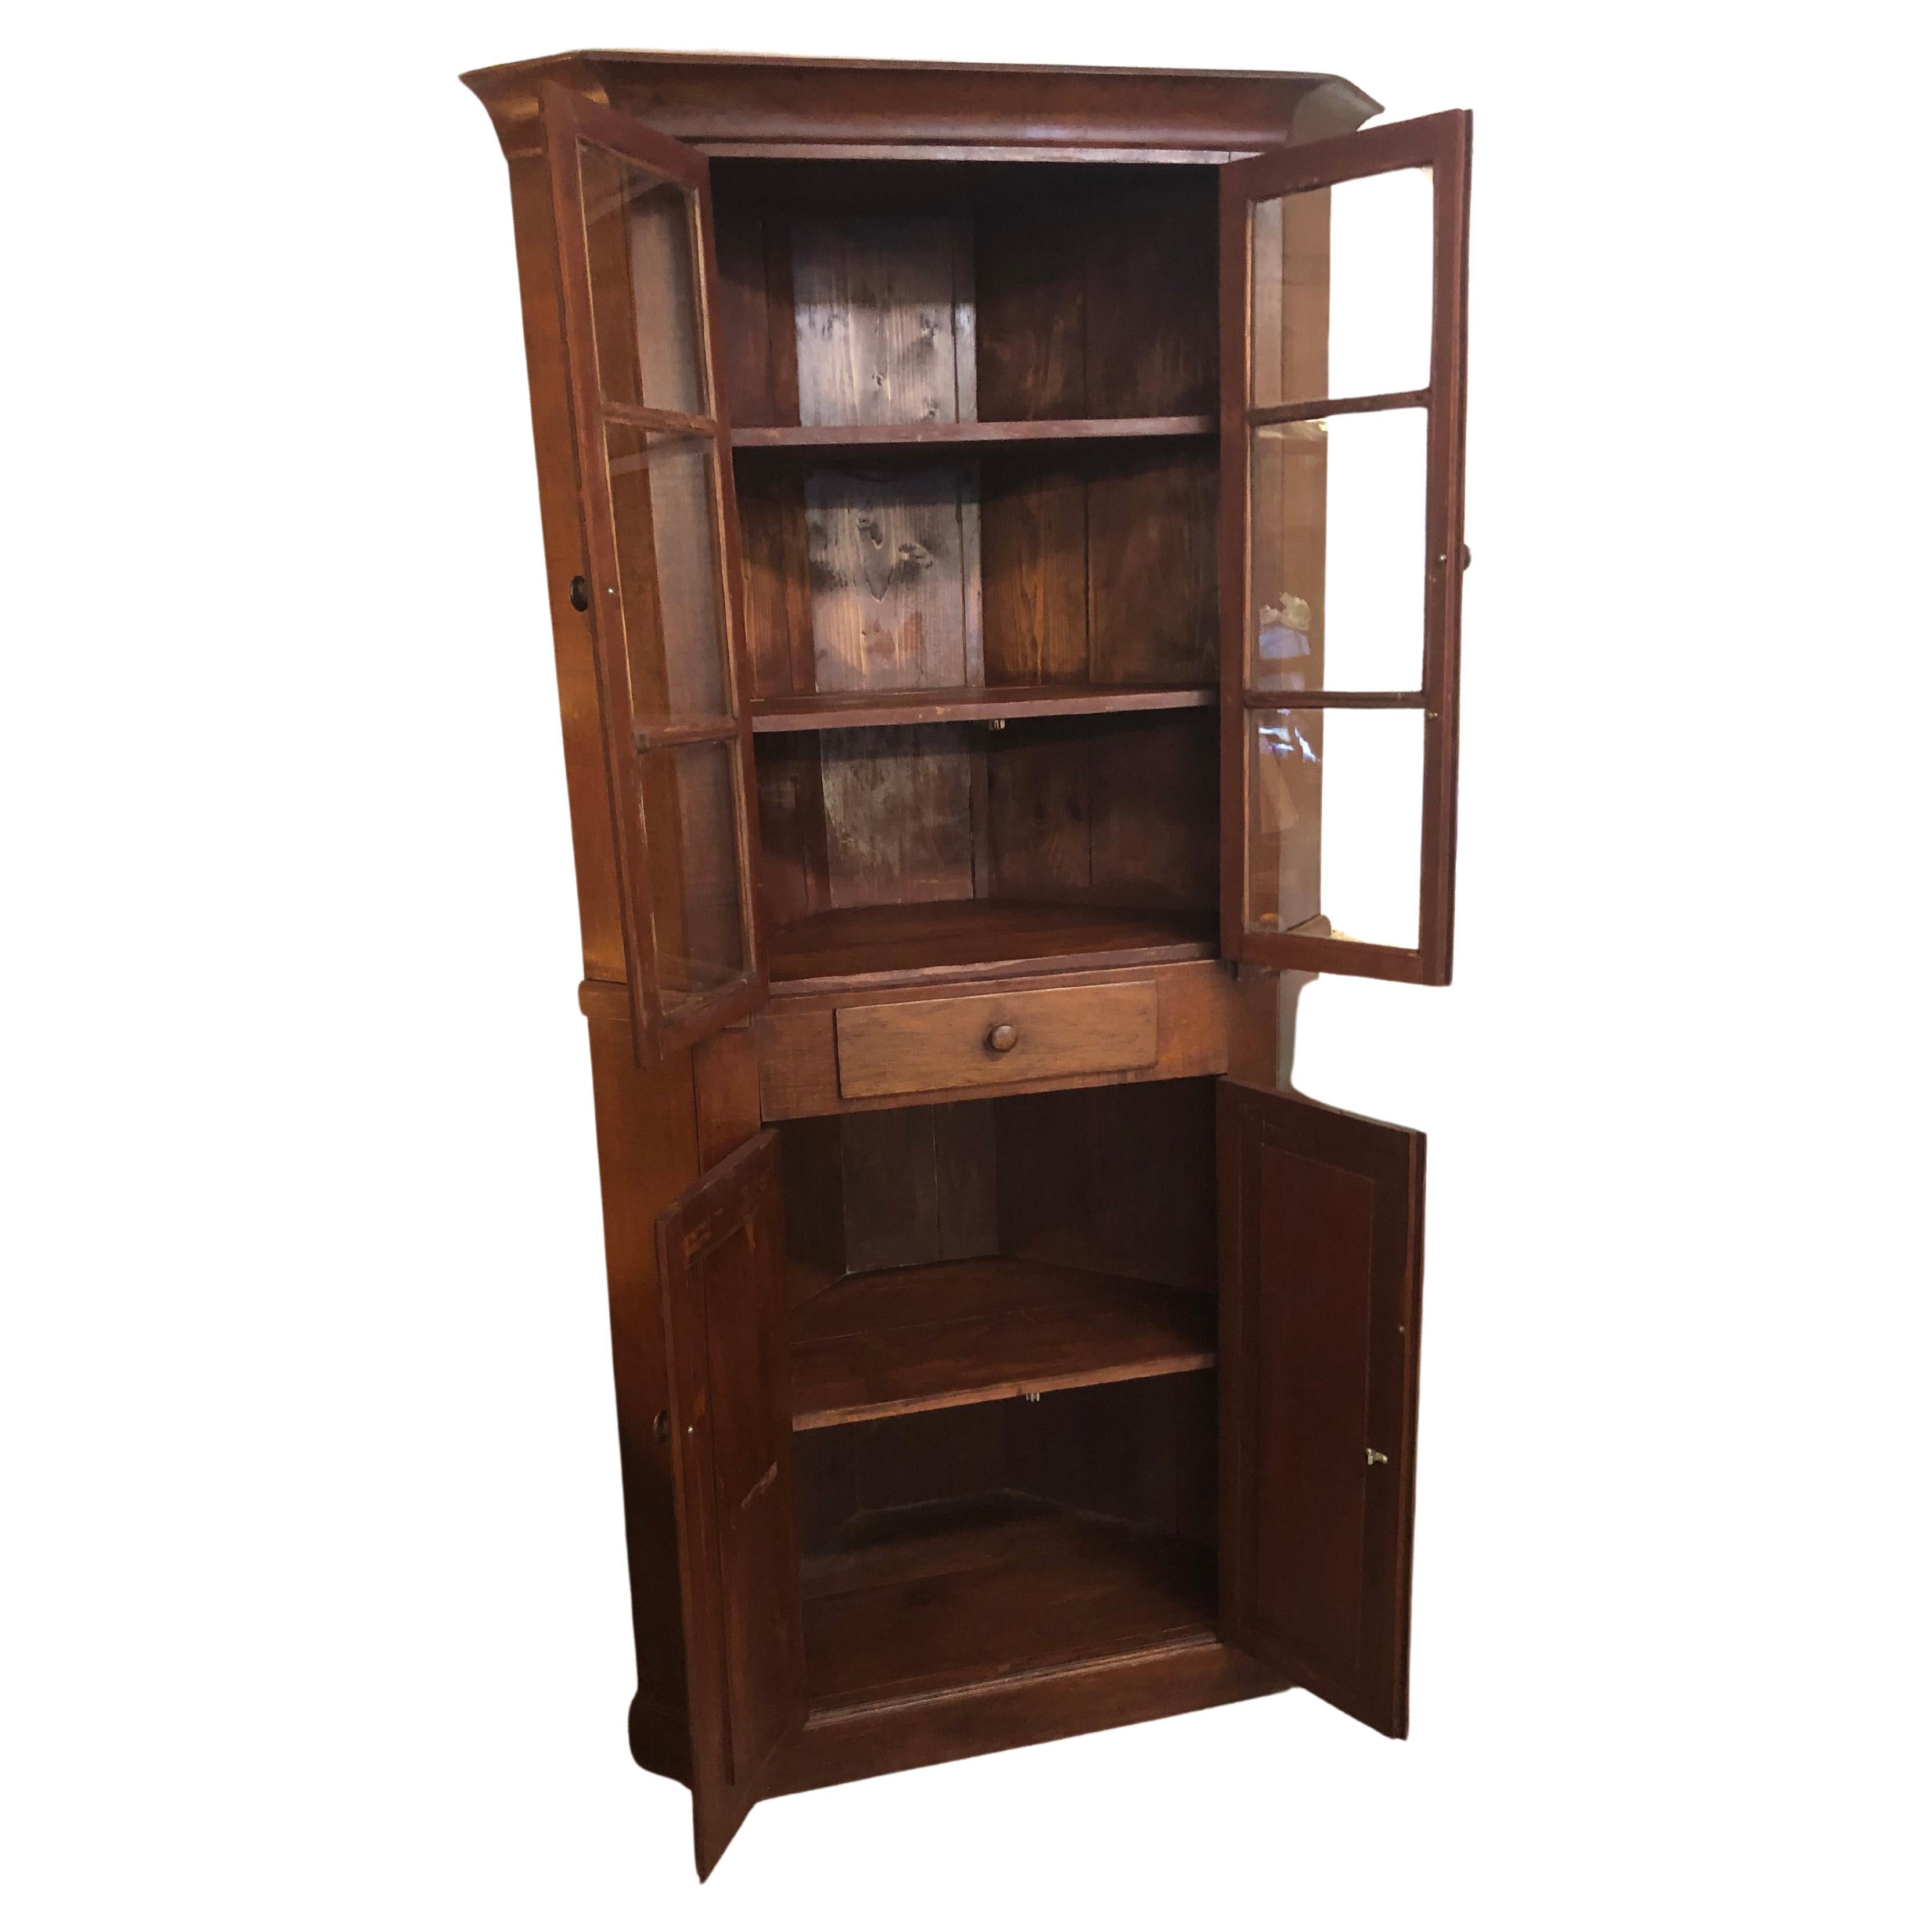 Handsome functional vintage cherry corner cupboard custom made in Middlesbury VA having old glass in top doors with two fixed interior shelves; Top shelves have 11